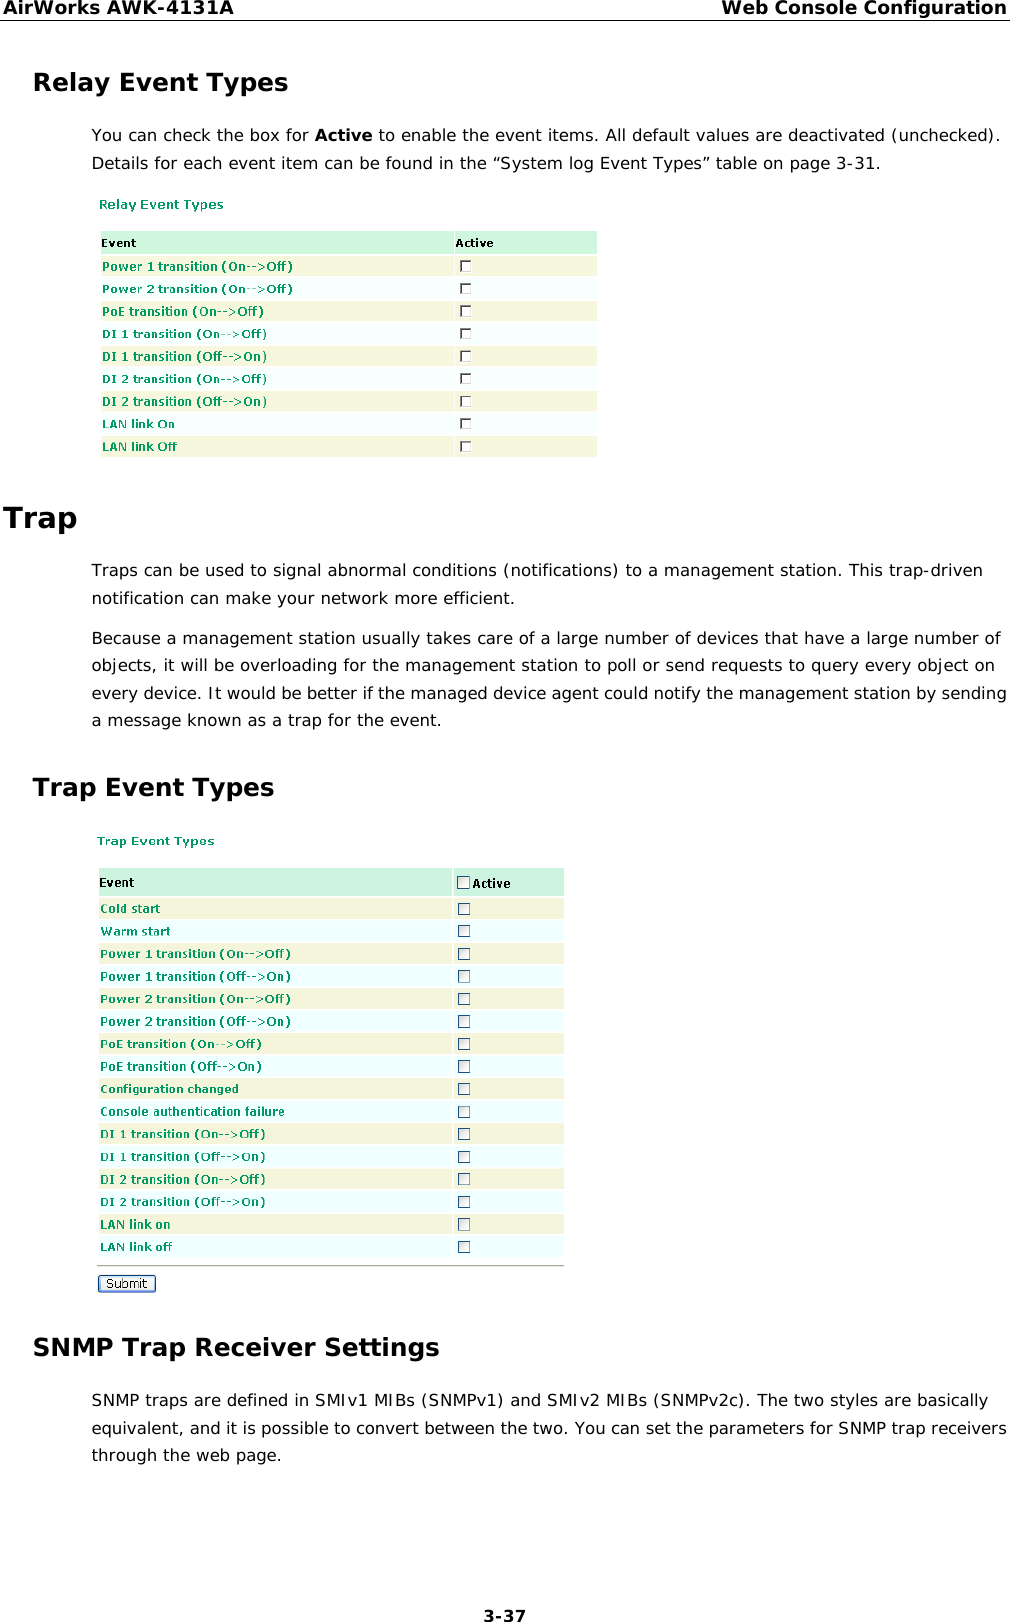 AirWorks AWK-4131A Web Console Configuration  3-37 Relay Event Types You can check the box for Active to enable the event items. All default values are deactivated (unchecked). Details for each event item can be found in the “System log Event Types” table on page 3-31.  Trap Traps can be used to signal abnormal conditions (notifications) to a management station. This trap-driven notification can make your network more efficient. Because a management station usually takes care of a large number of devices that have a large number of objects, it will be overloading for the management station to poll or send requests to query every object on every device. It would be better if the managed device agent could notify the management station by sending a message known as a trap for the event. Trap Event Types  SNMP Trap Receiver Settings SNMP traps are defined in SMIv1 MIBs (SNMPv1) and SMIv2 MIBs (SNMPv2c). The two styles are basically equivalent, and it is possible to convert between the two. You can set the parameters for SNMP trap receivers through the web page. 